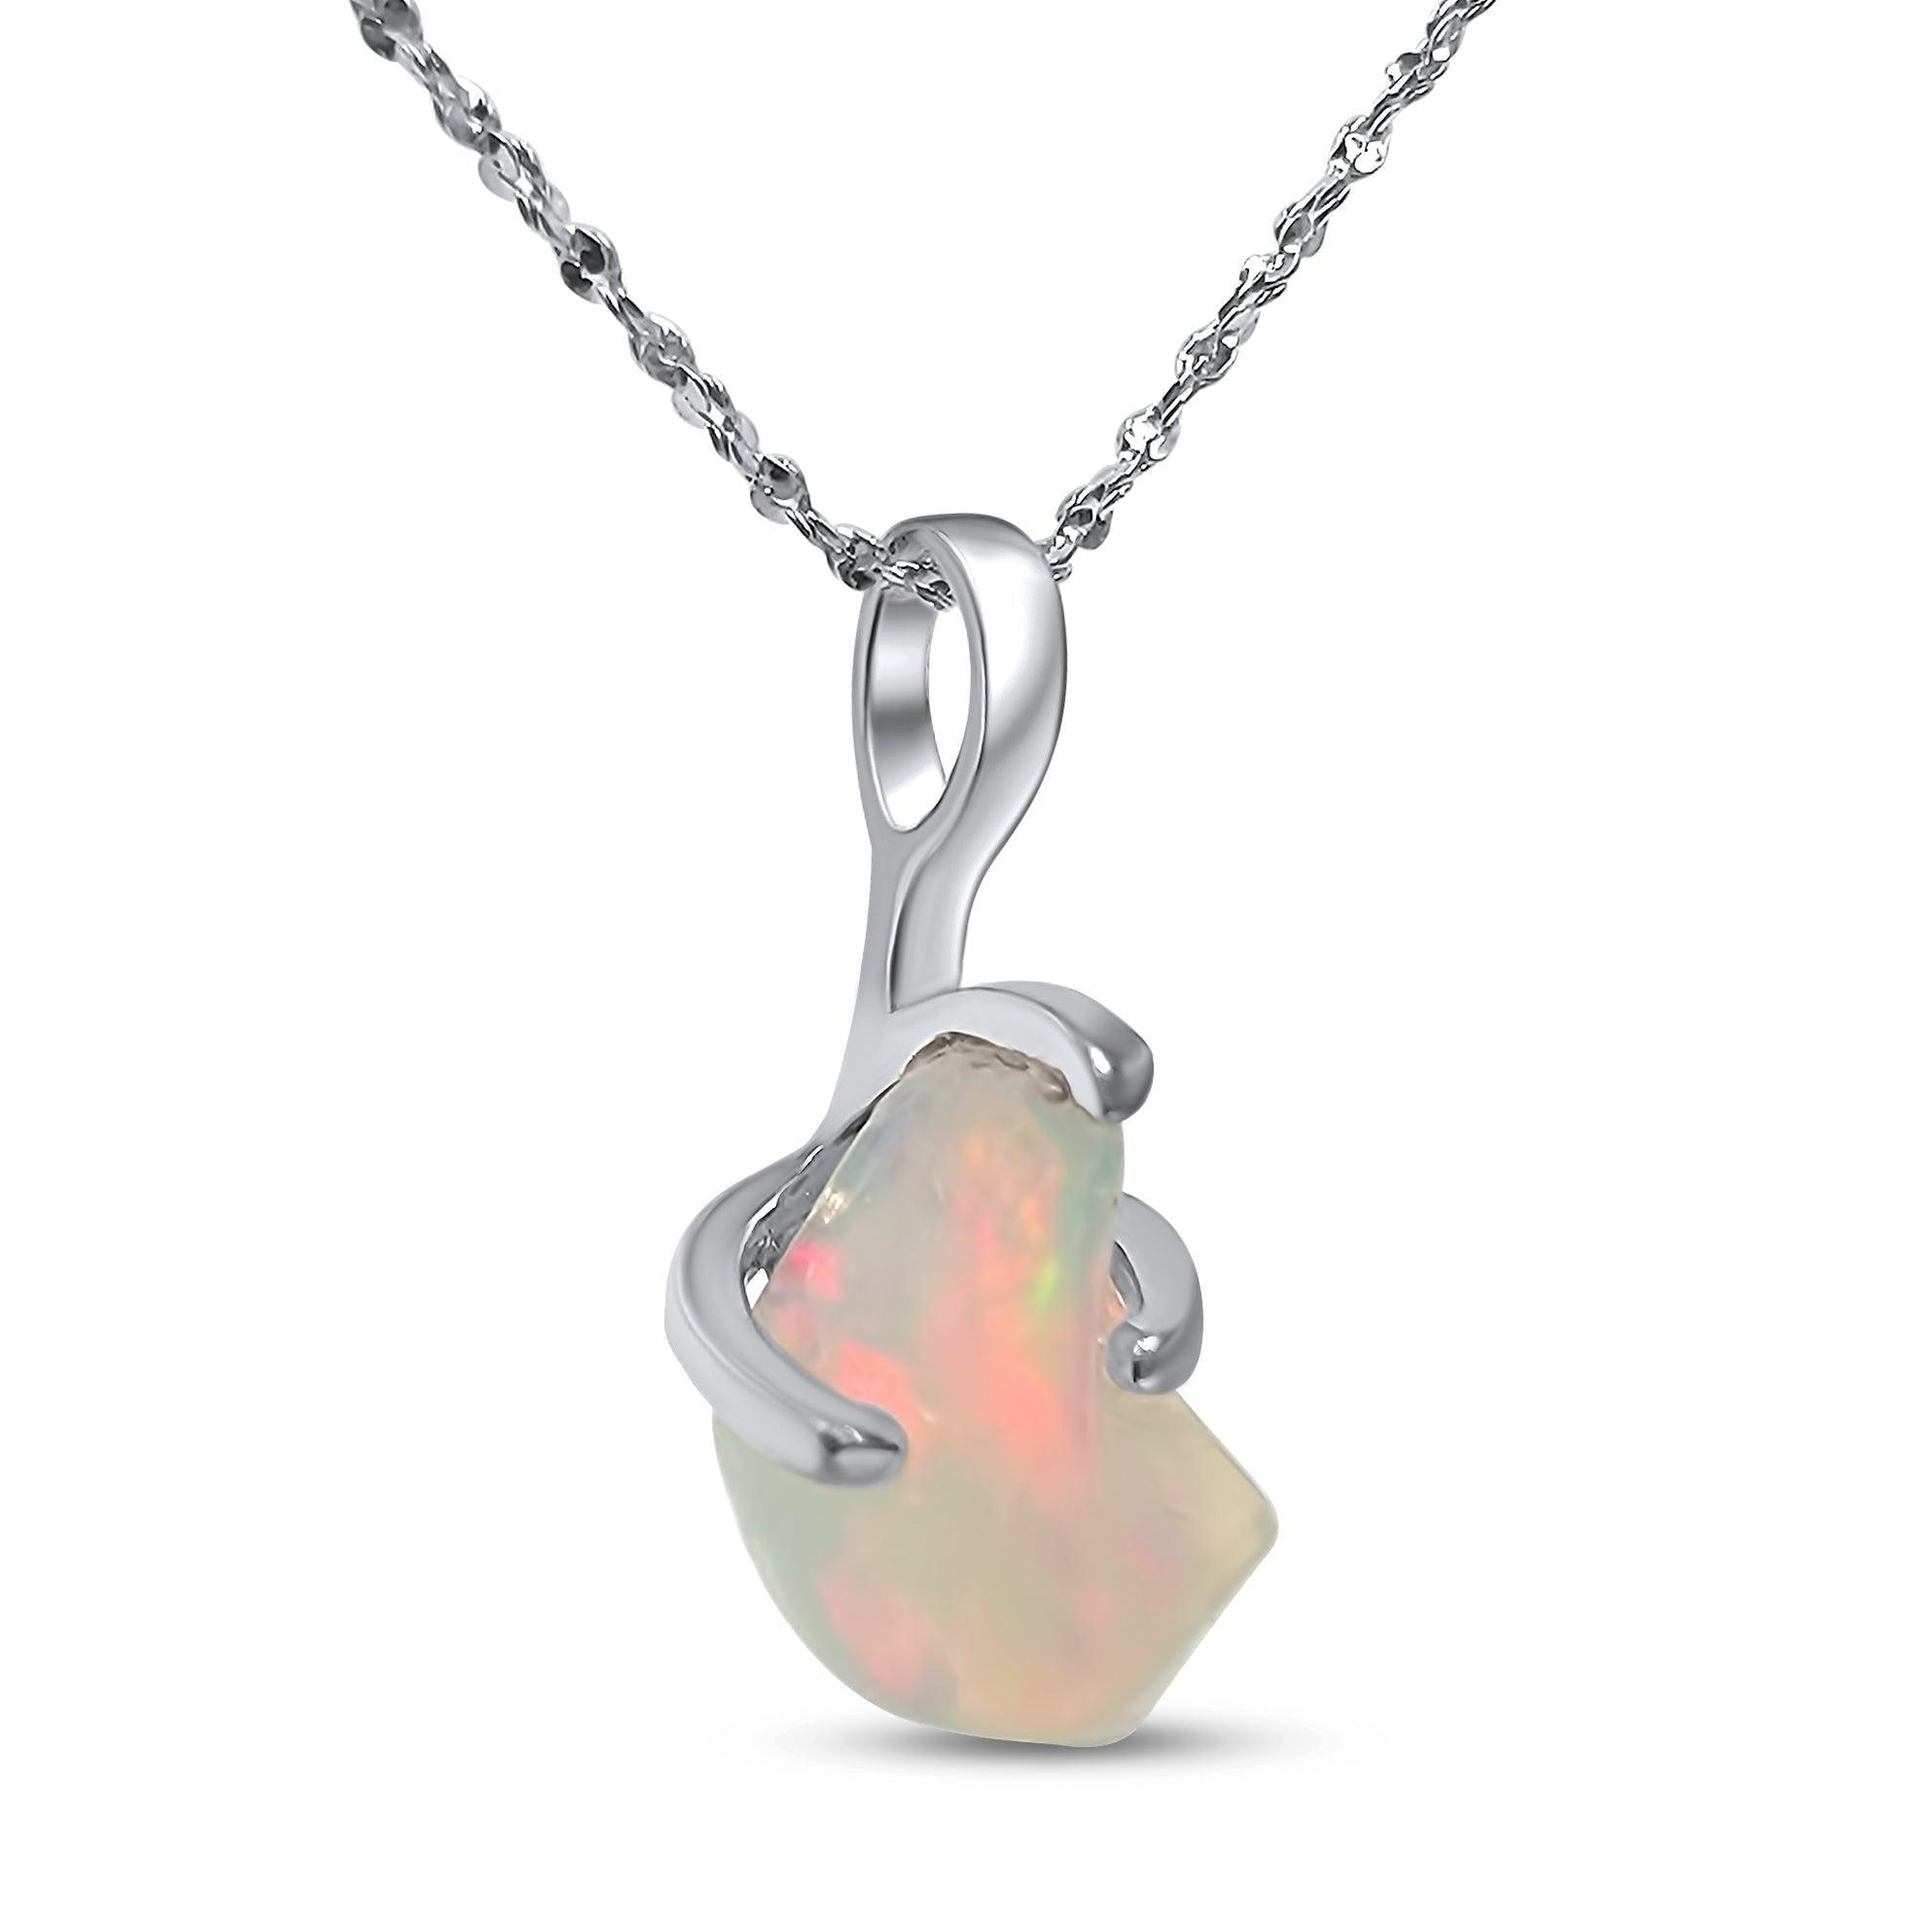 Sterling silver pendant with Australian white opal from Coober Pedy